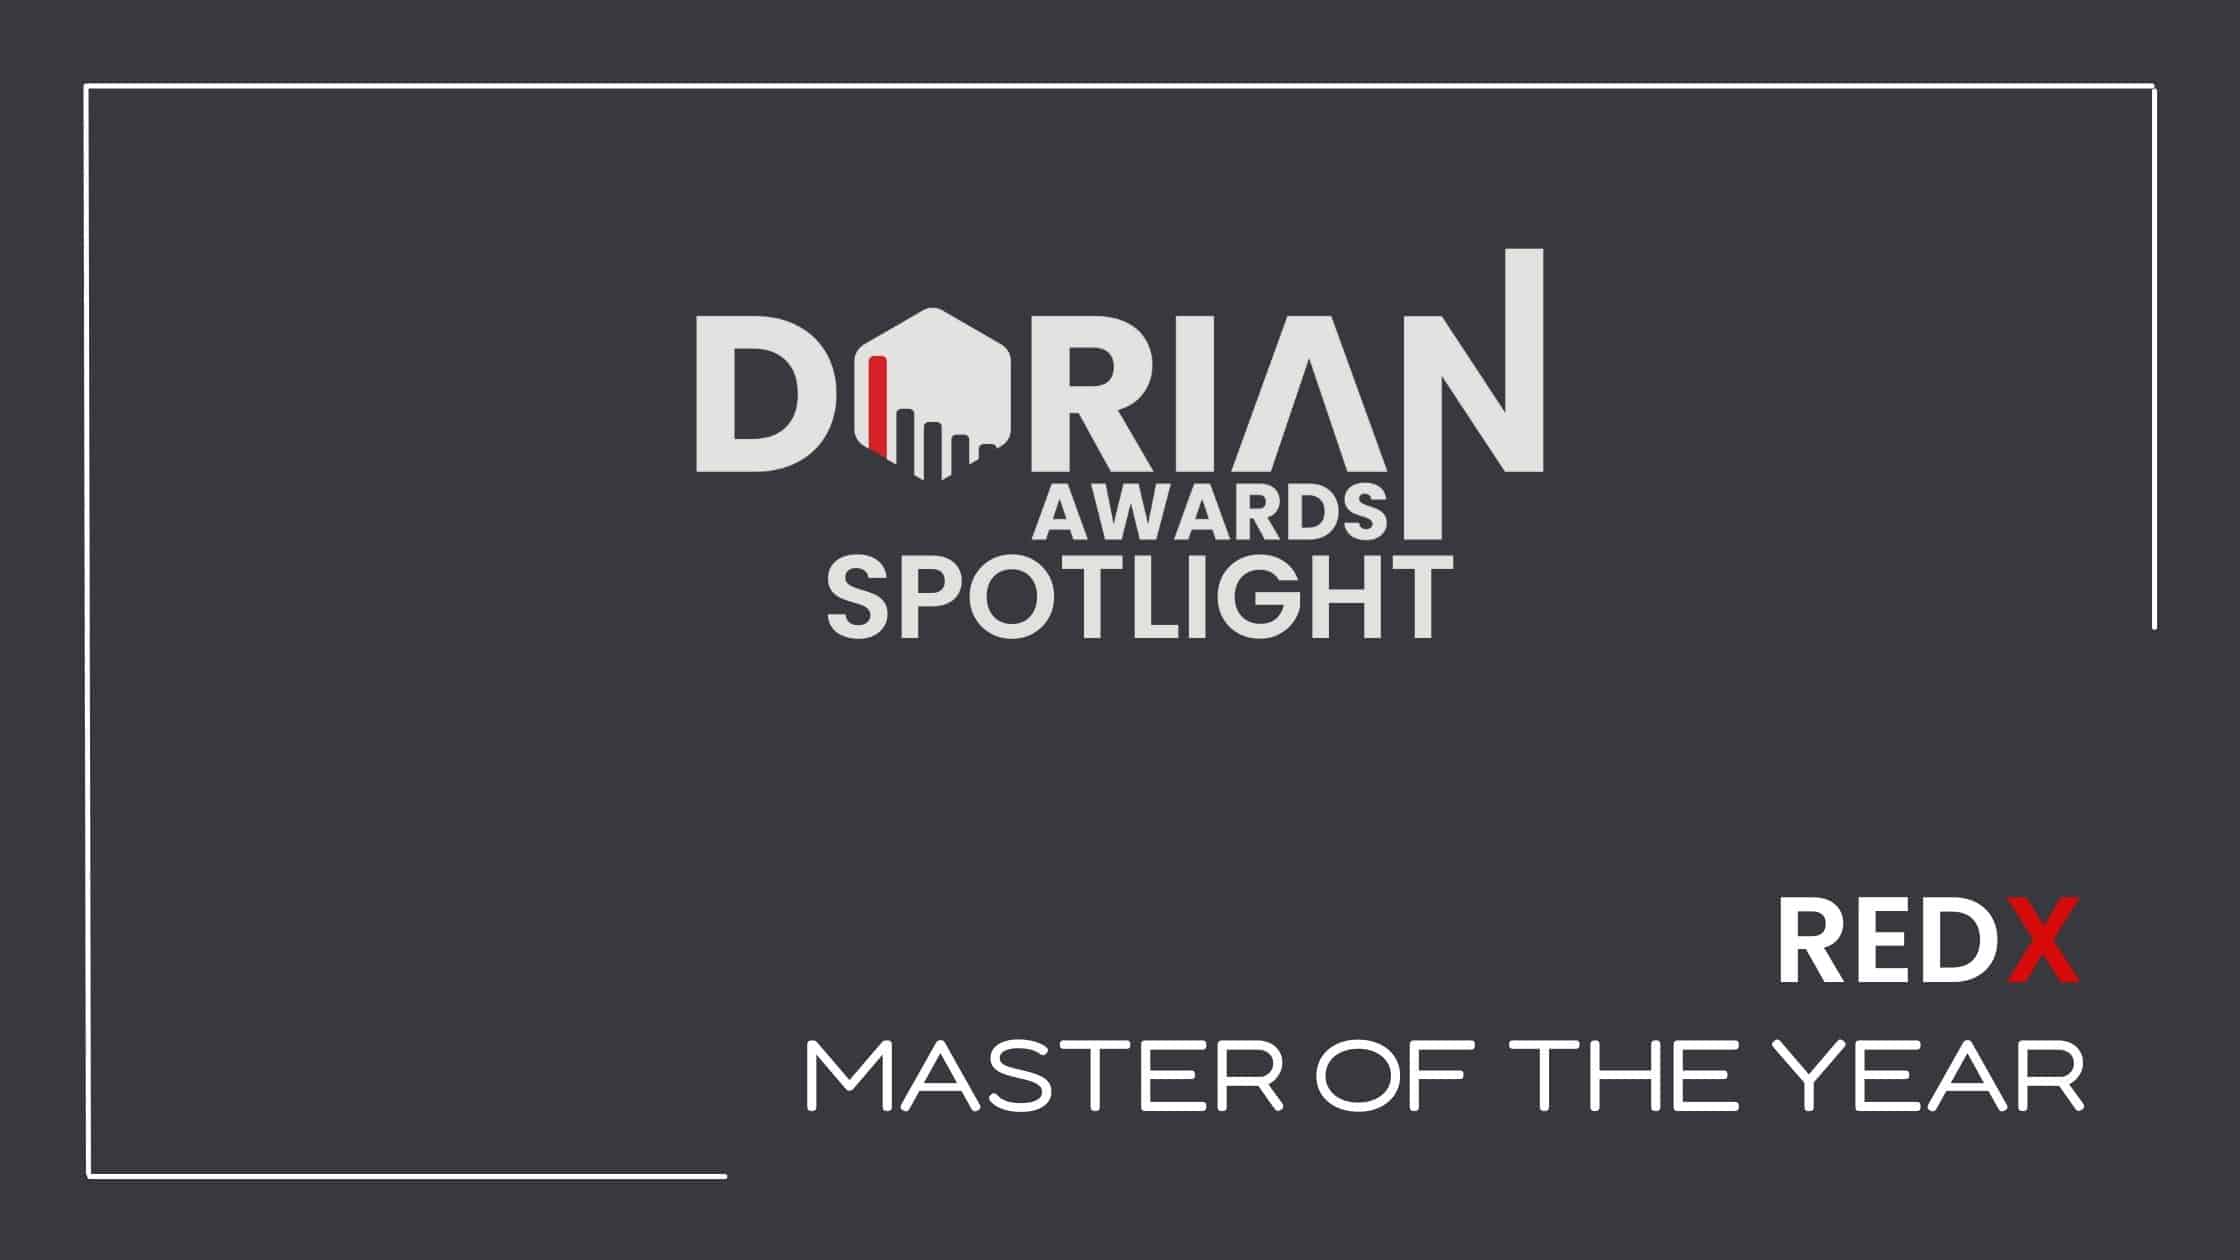 Dorian Awards Red X Master of the Year Award Header on a grey background